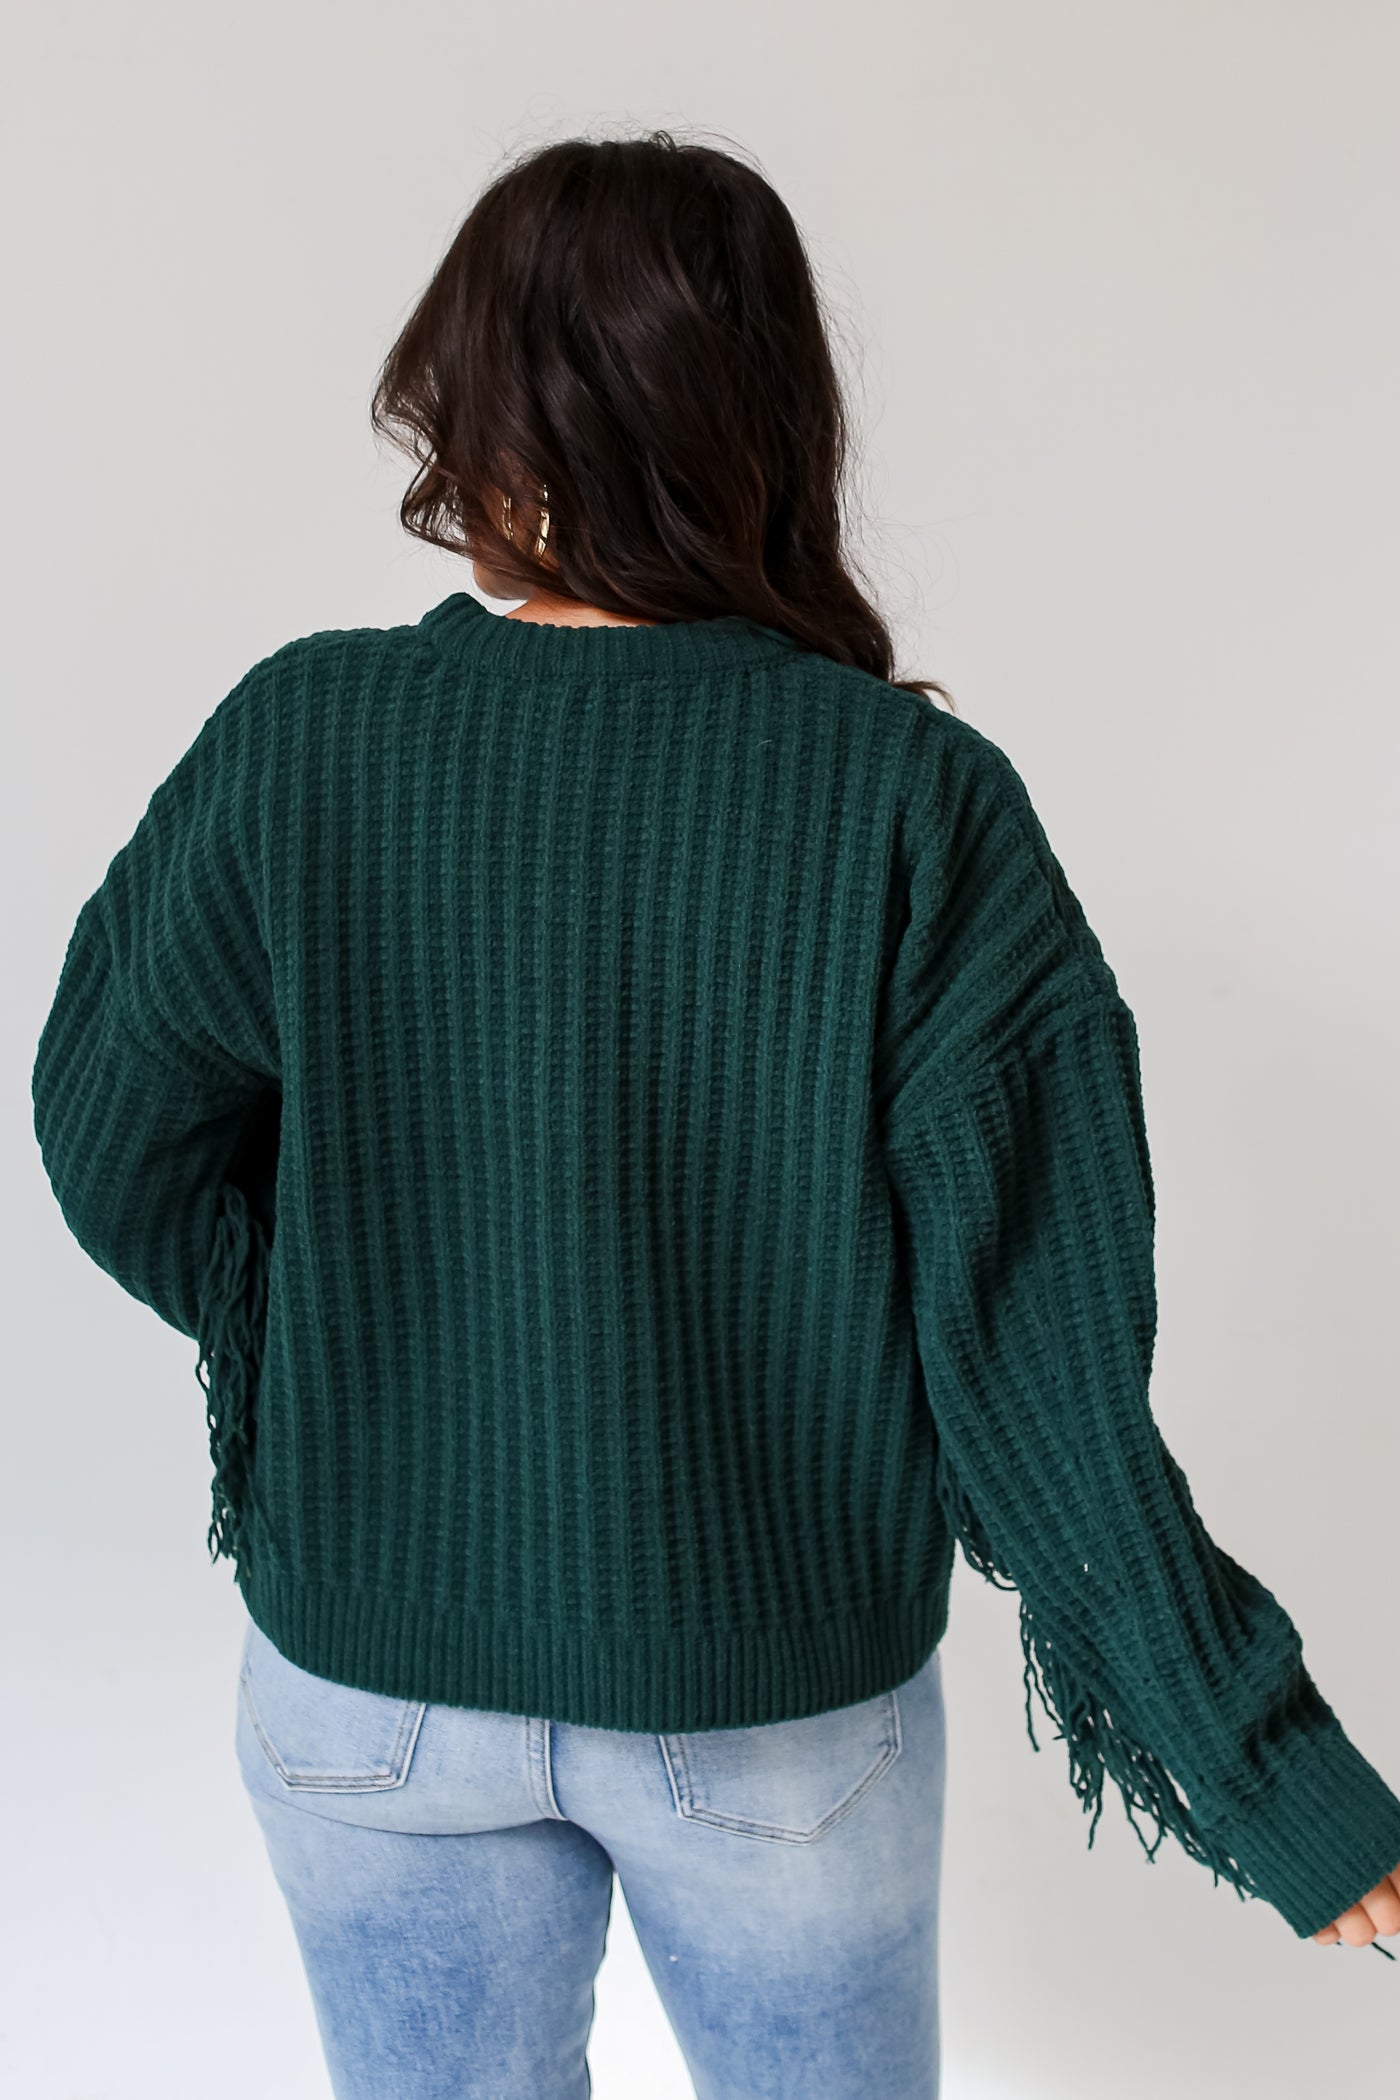 green sweaters for fall